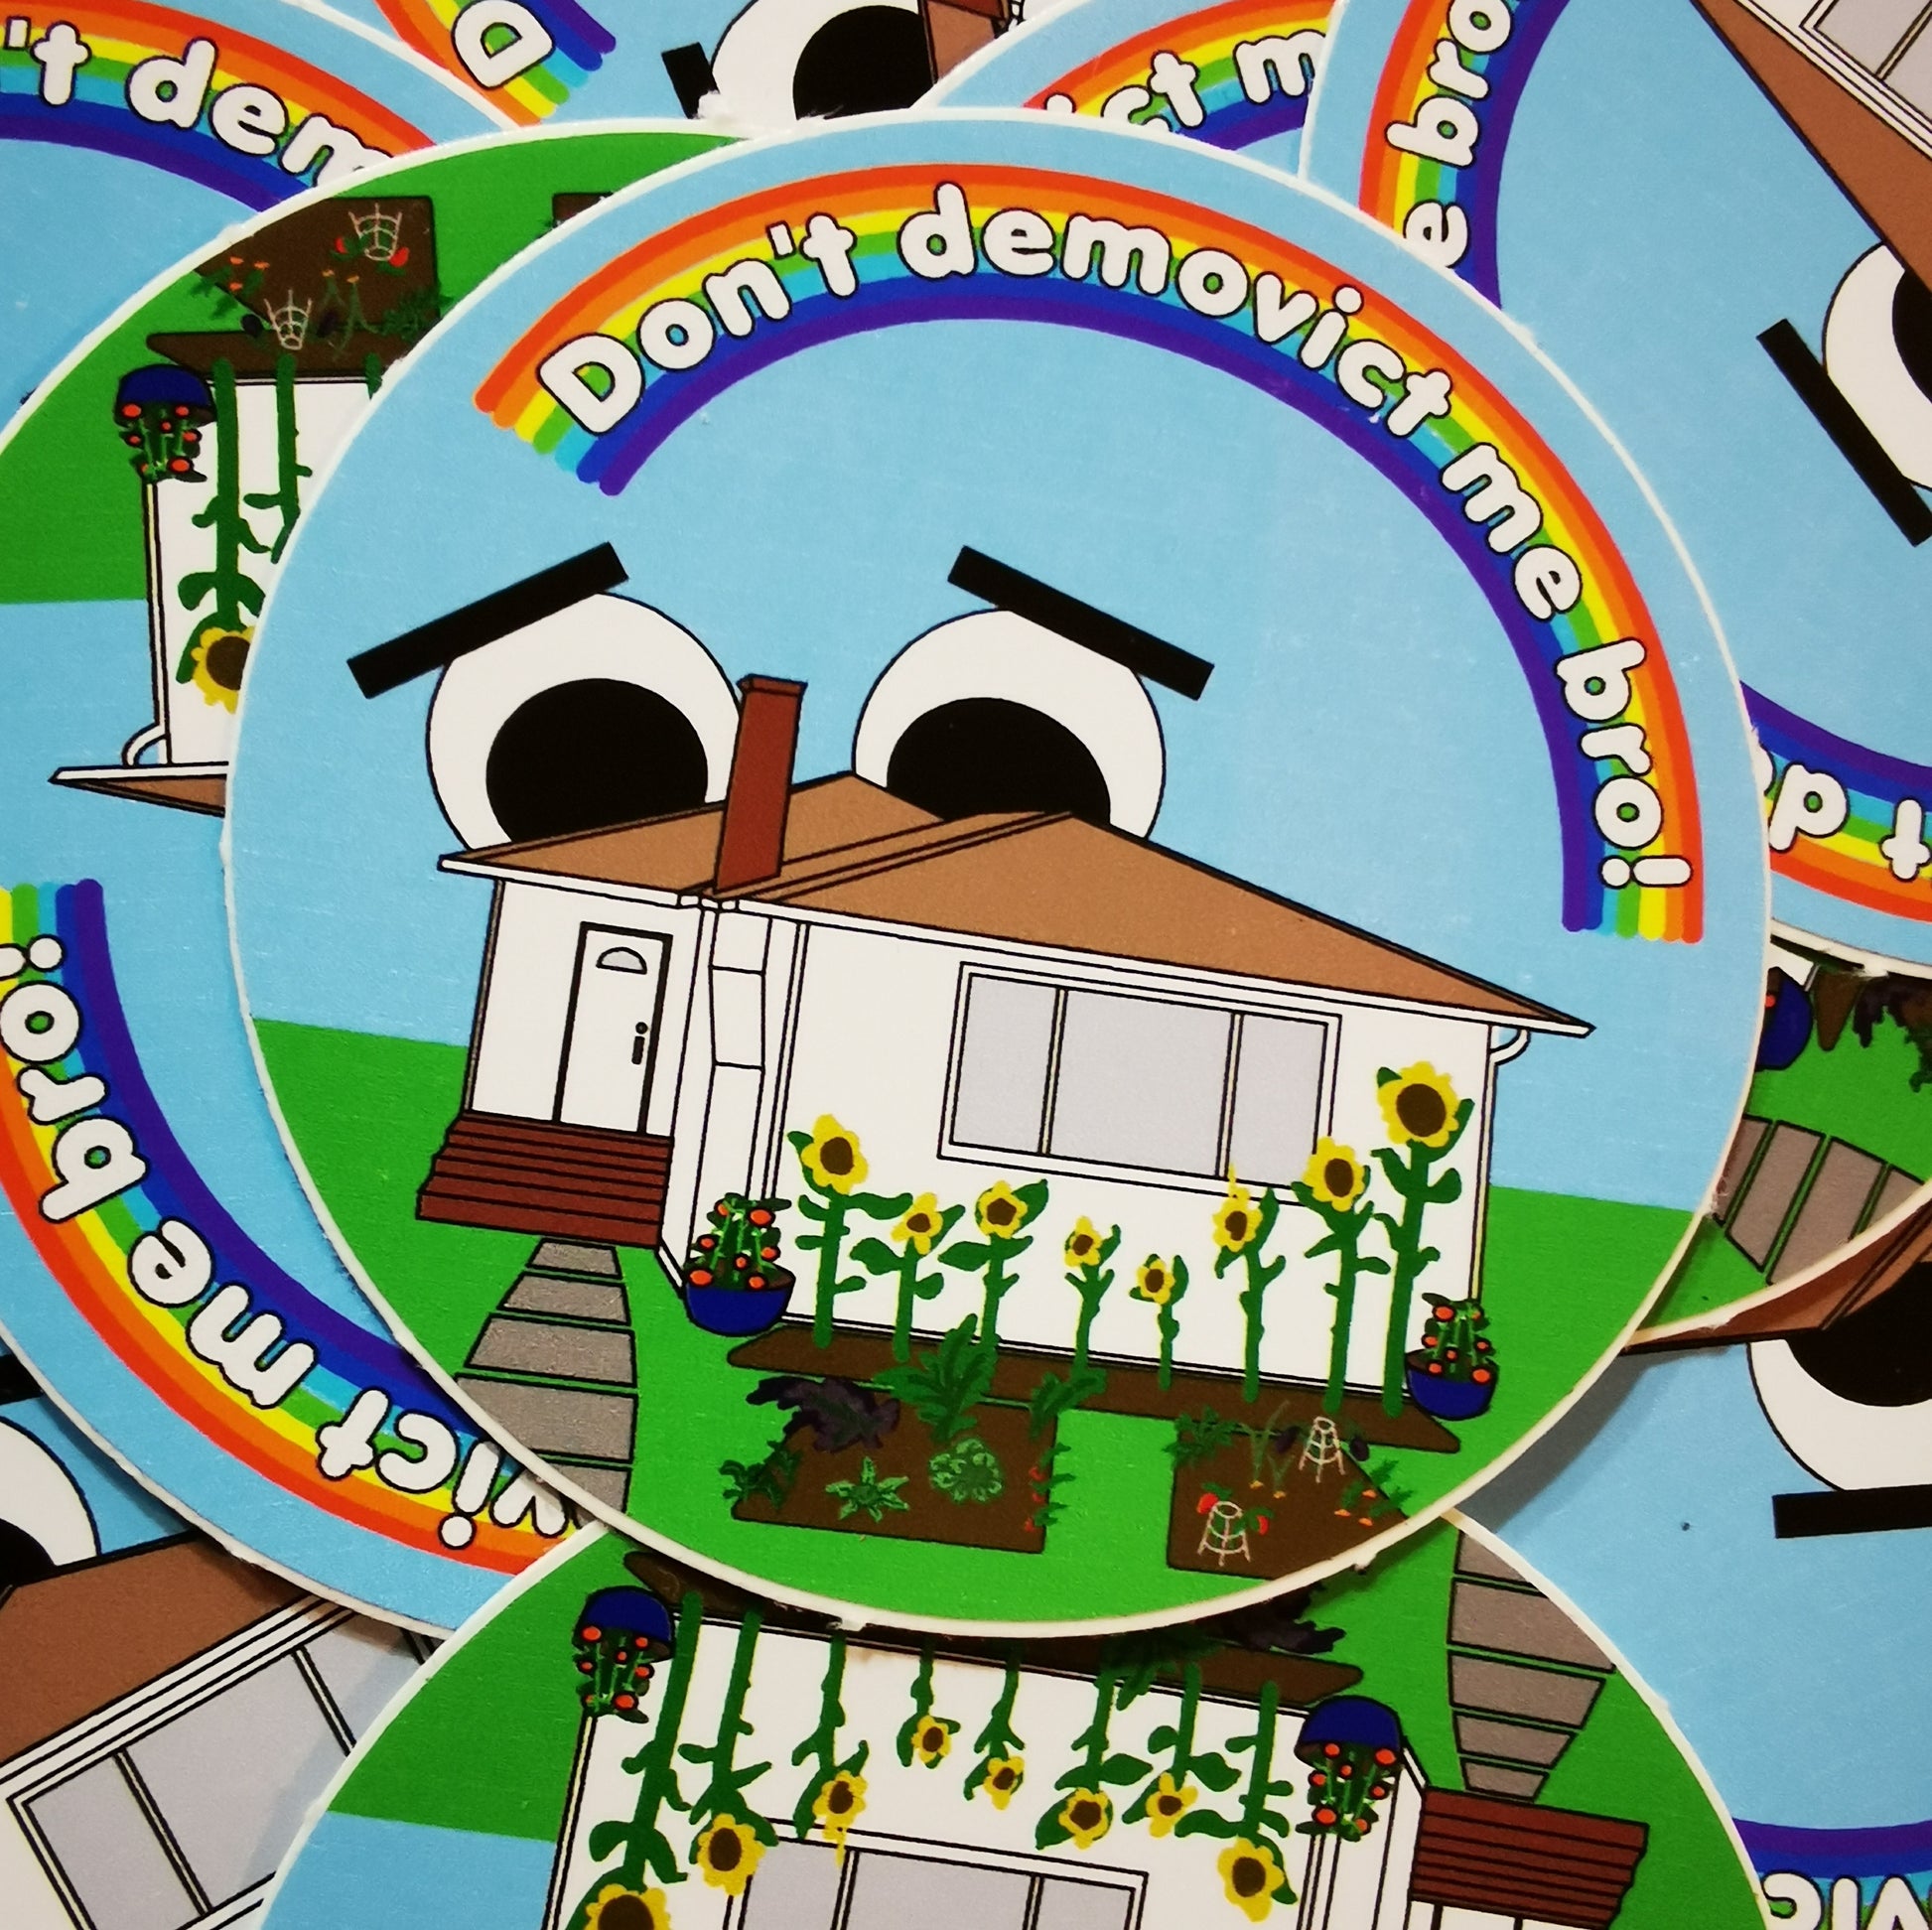 circle sticker with white detached home with sunflowers and a vegetable garden. The house has big cartoon eyes on the roof and worried eyebrows. there is a rainbow in the sky with the words "don't demovict me, bro!"